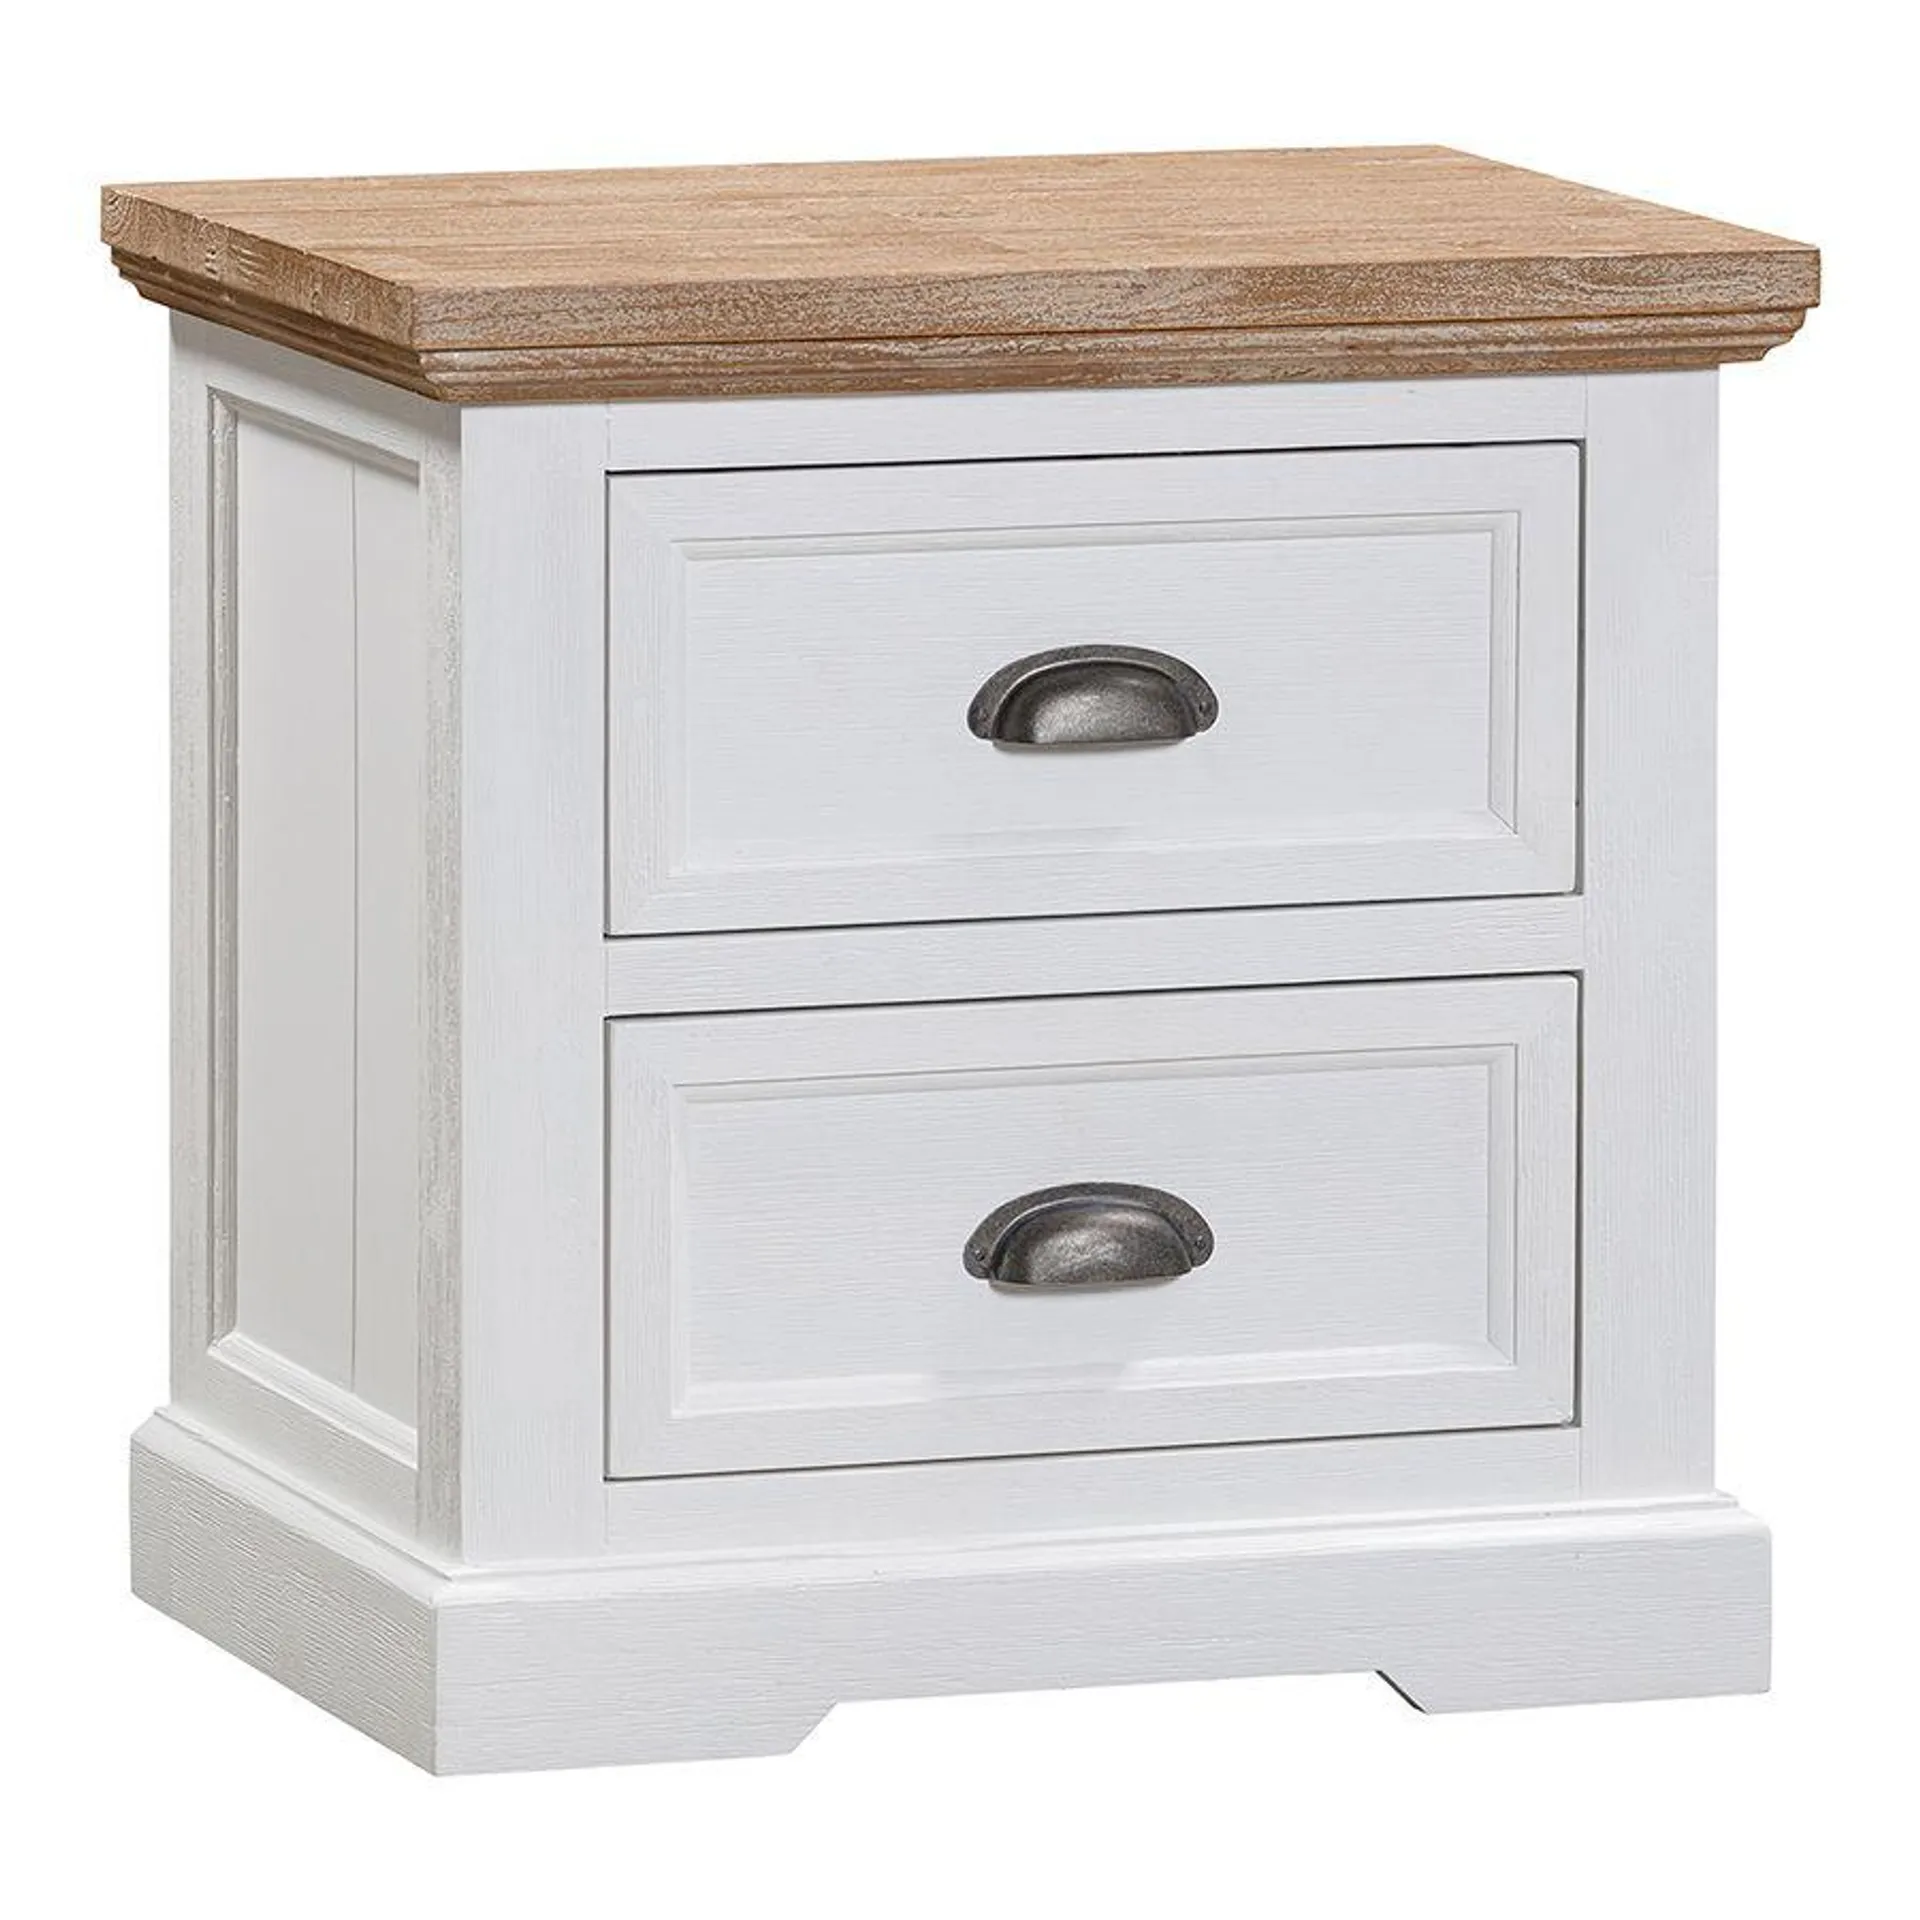 Clementine Two Toned Bedside Table